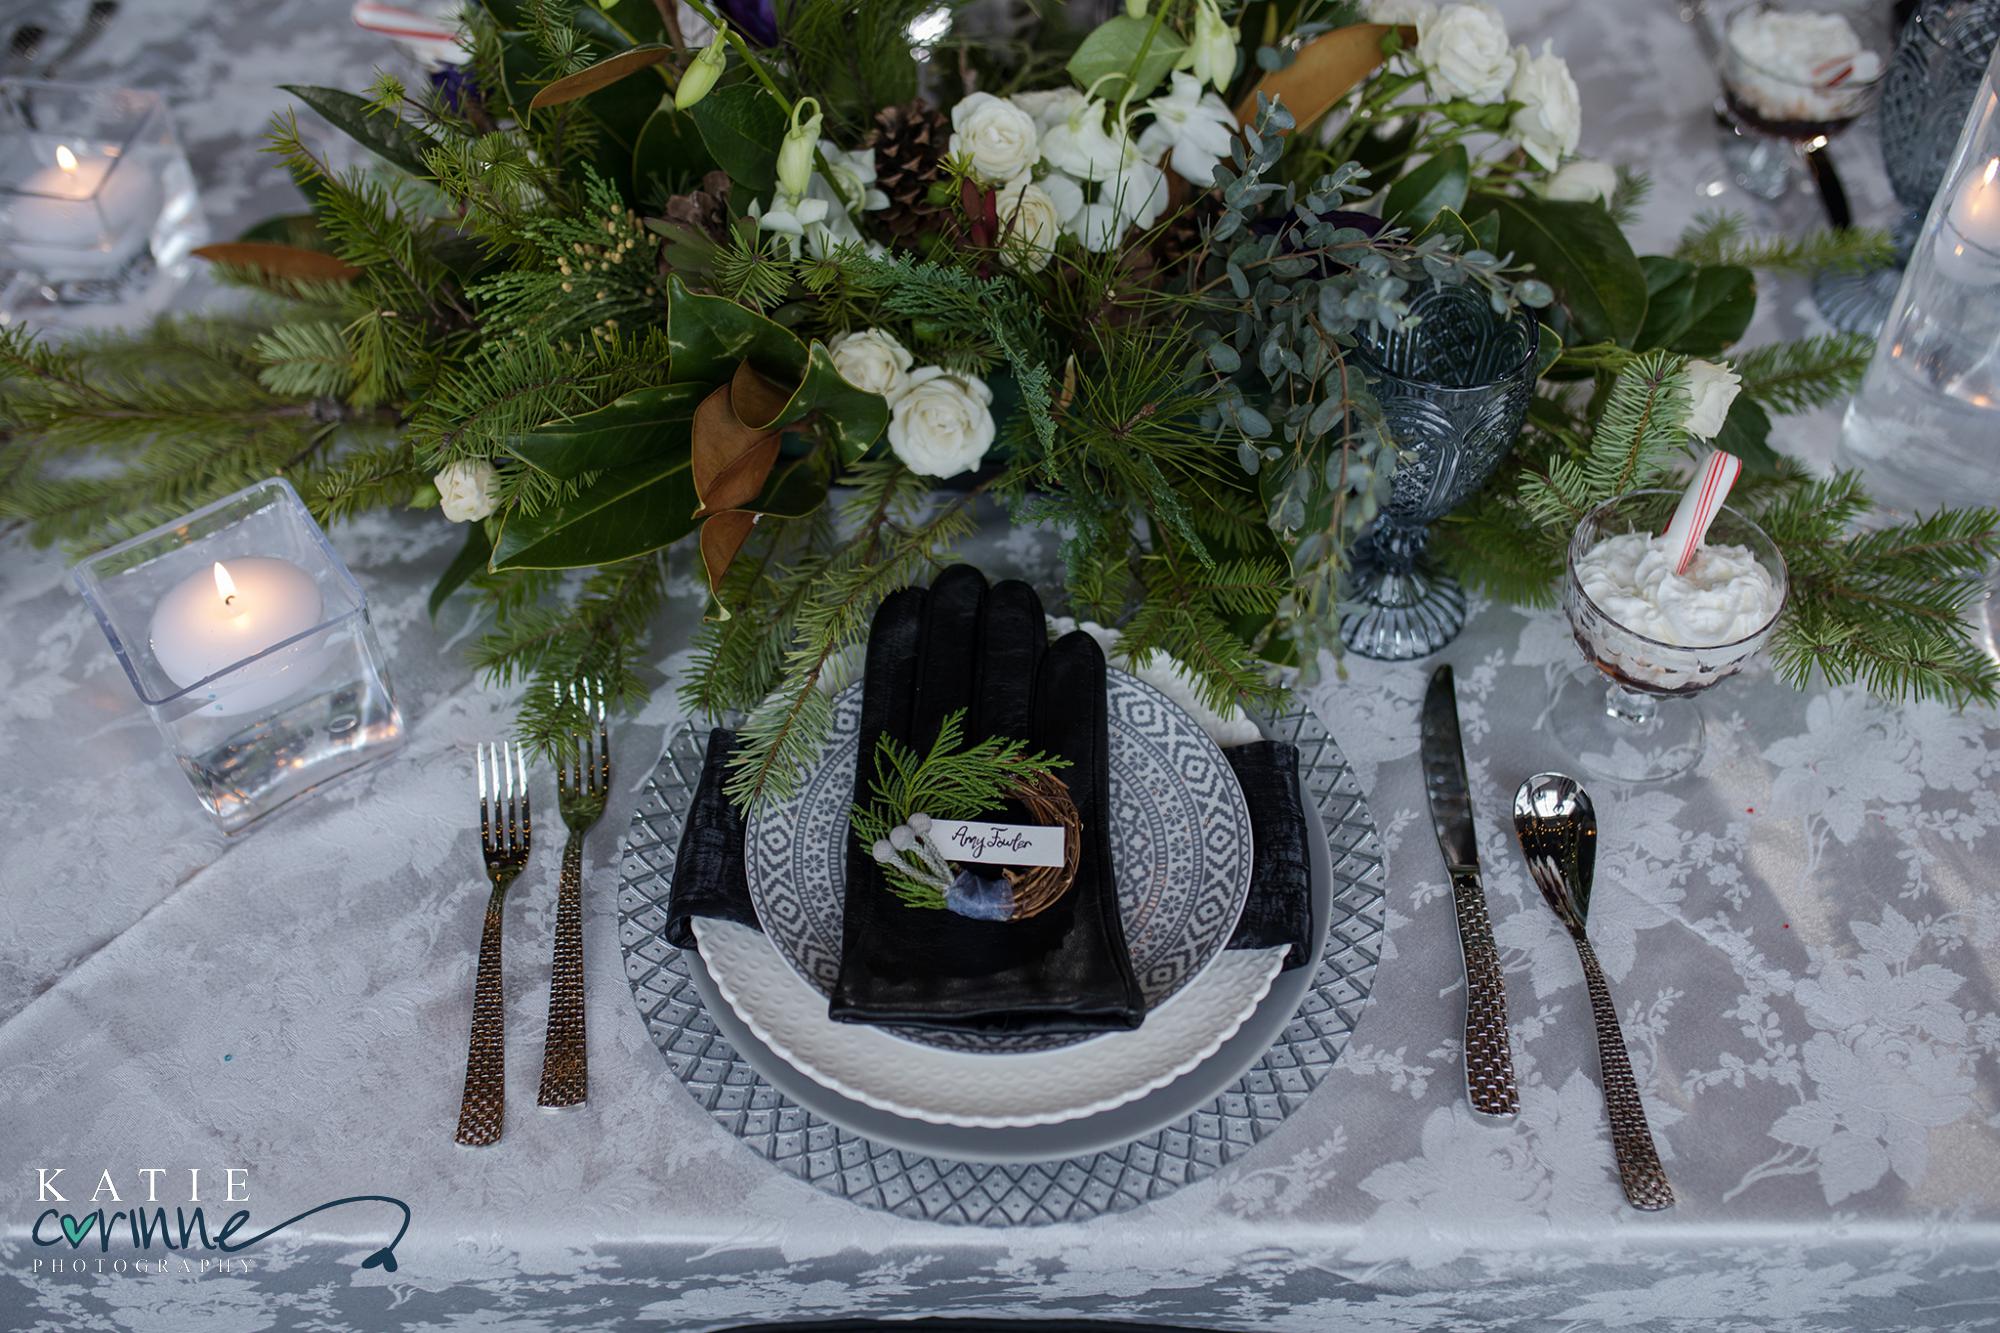 place setting at wedding with gloves on top of plates as party favors